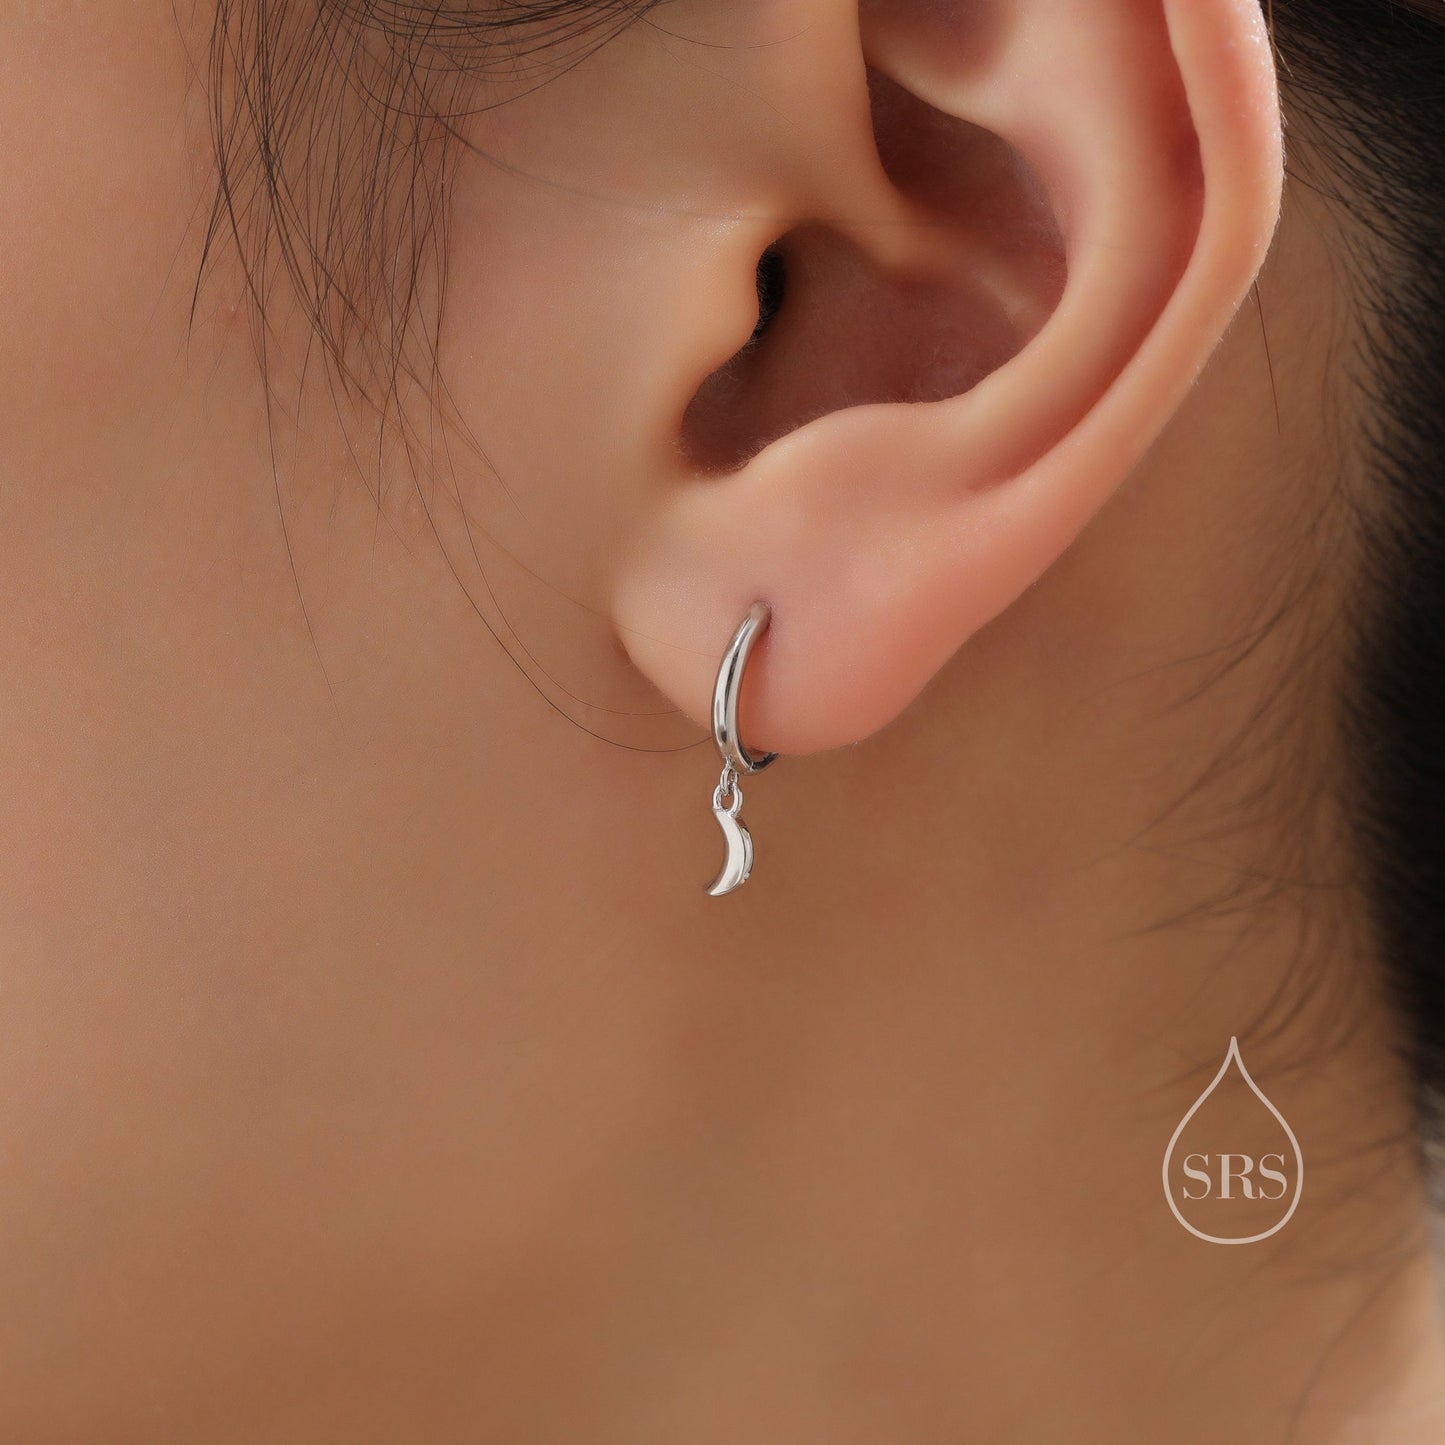 Asymmetric Moon and Star Dangle Huggie Hoop Earrings in Sterling Silver, Silver or Gold or Rose Gold, Tiny Moon and Star Skinny Hoops